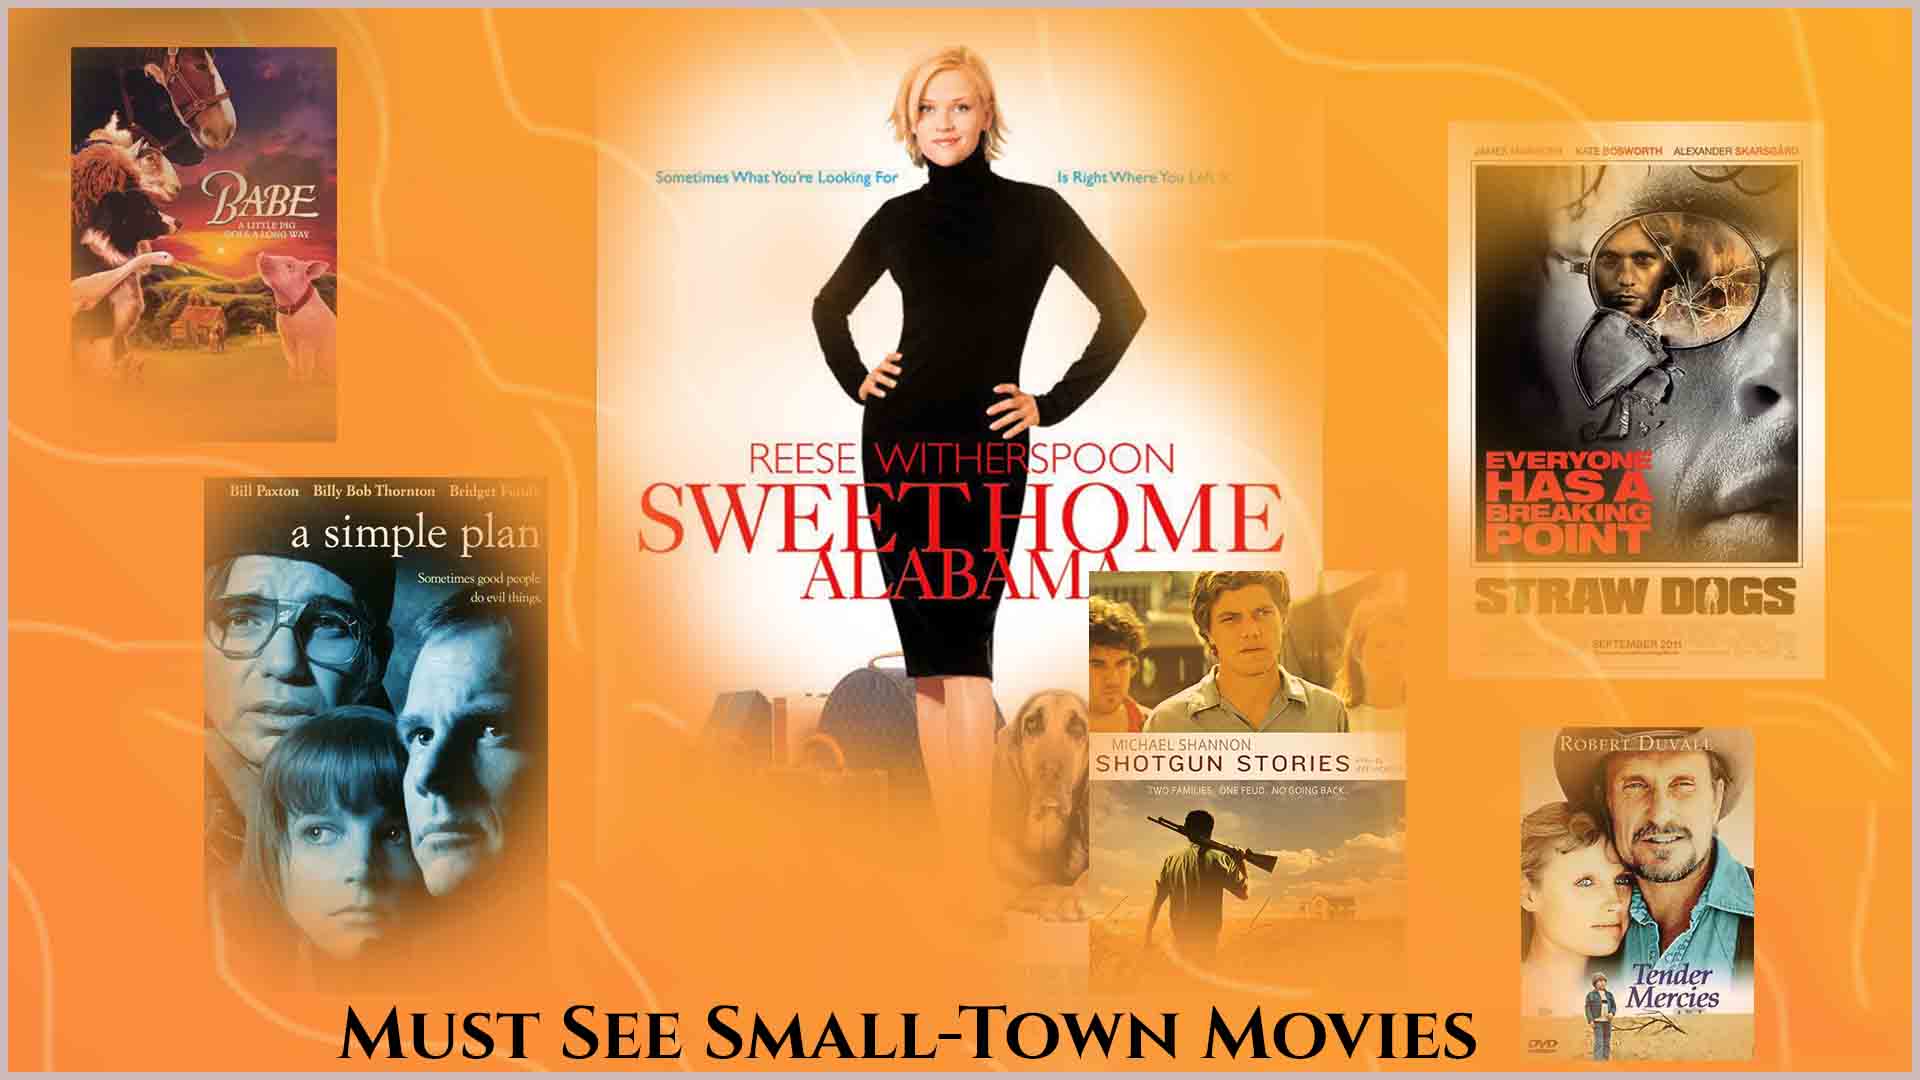 Must See Small-Town Movies